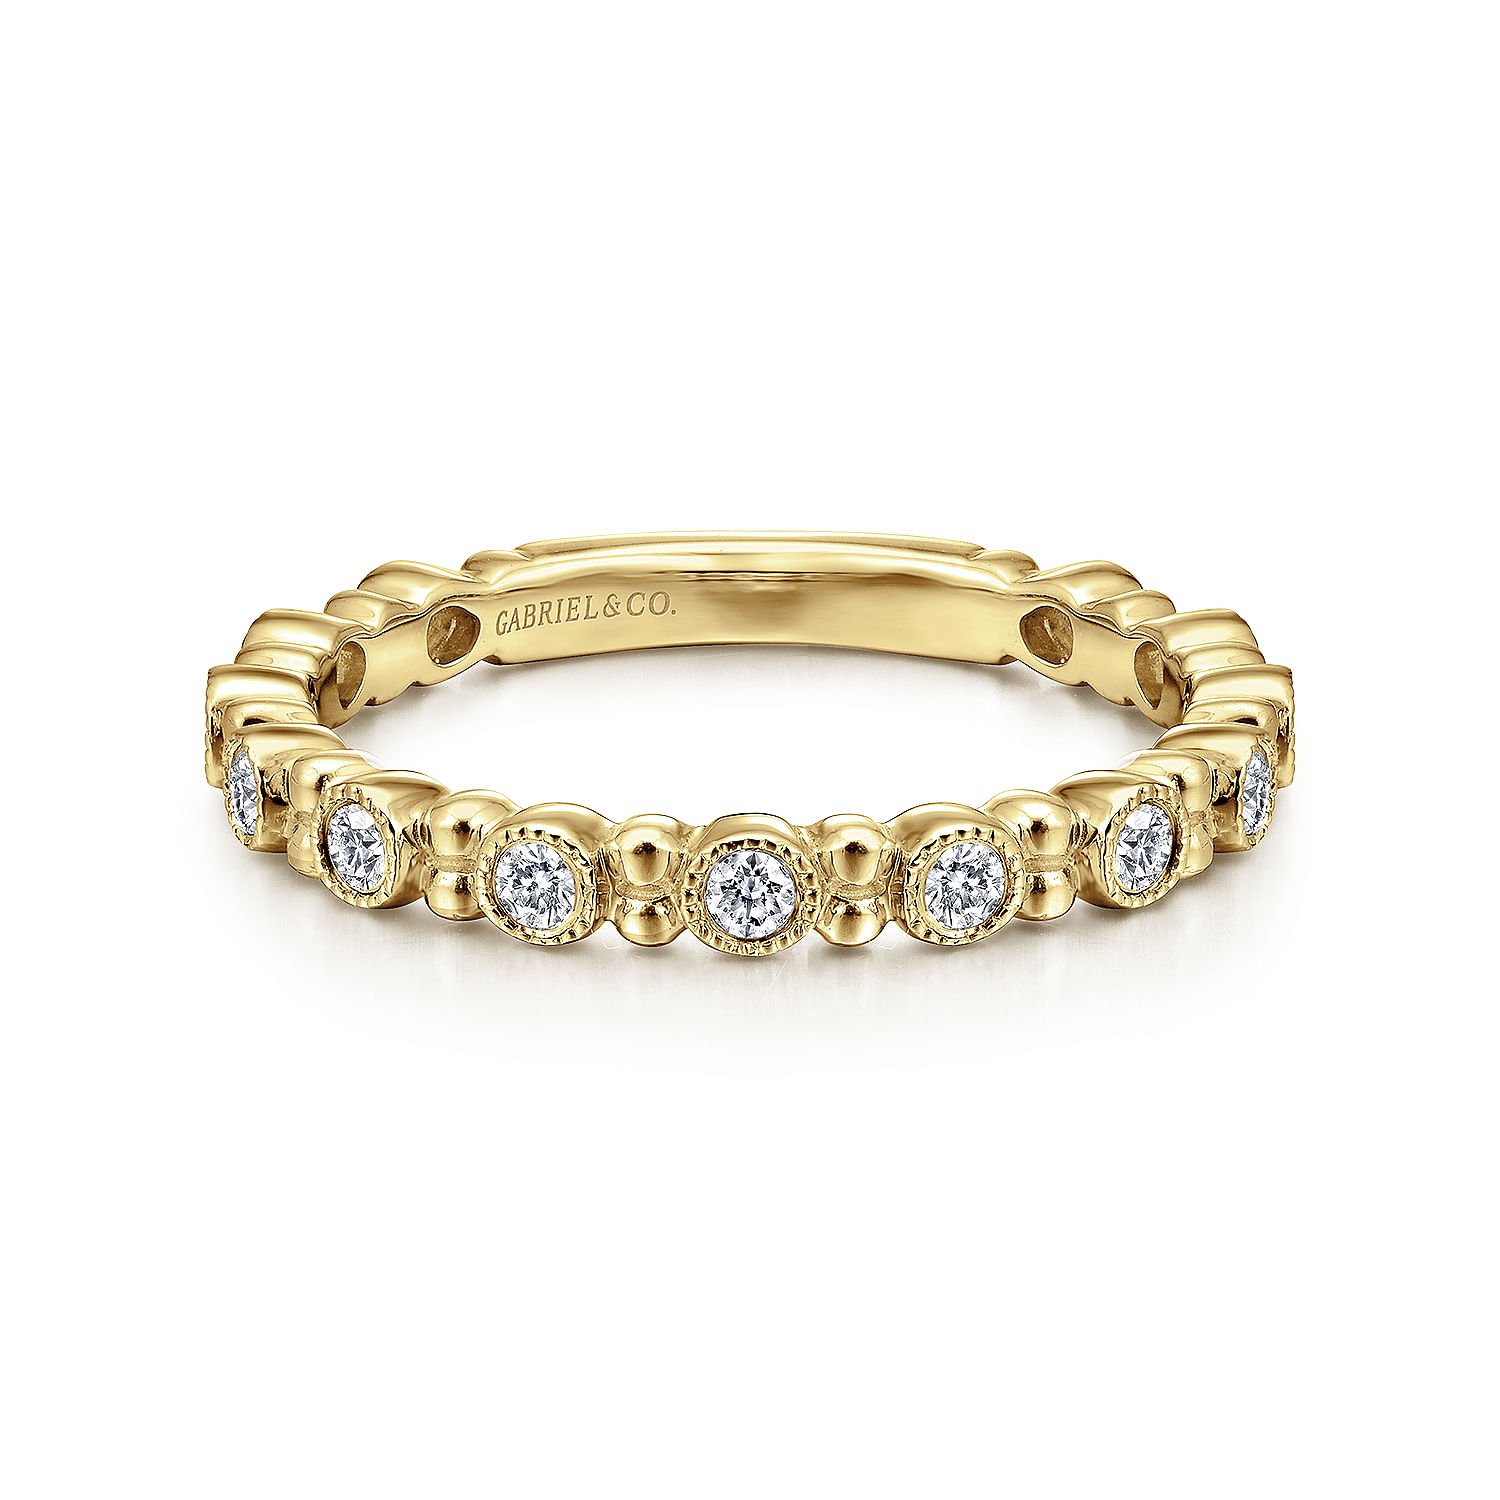 14K Yellow Gold Stackable Diamond Ring with Bead Spacers